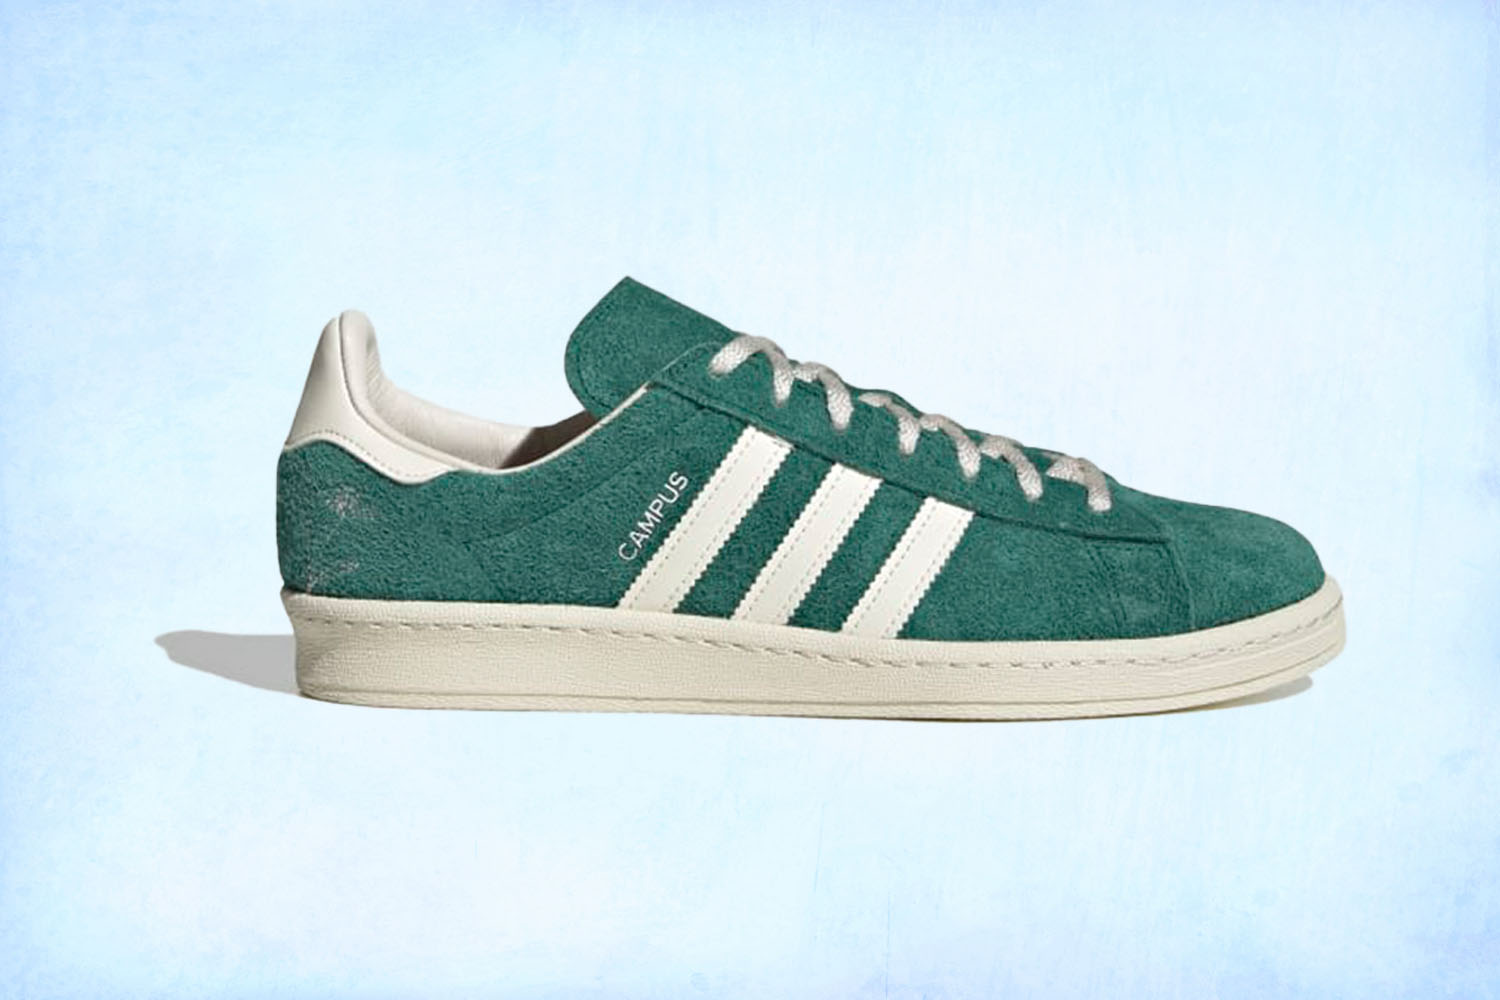 a pair of green Adidas campus sneakers on a light blue background